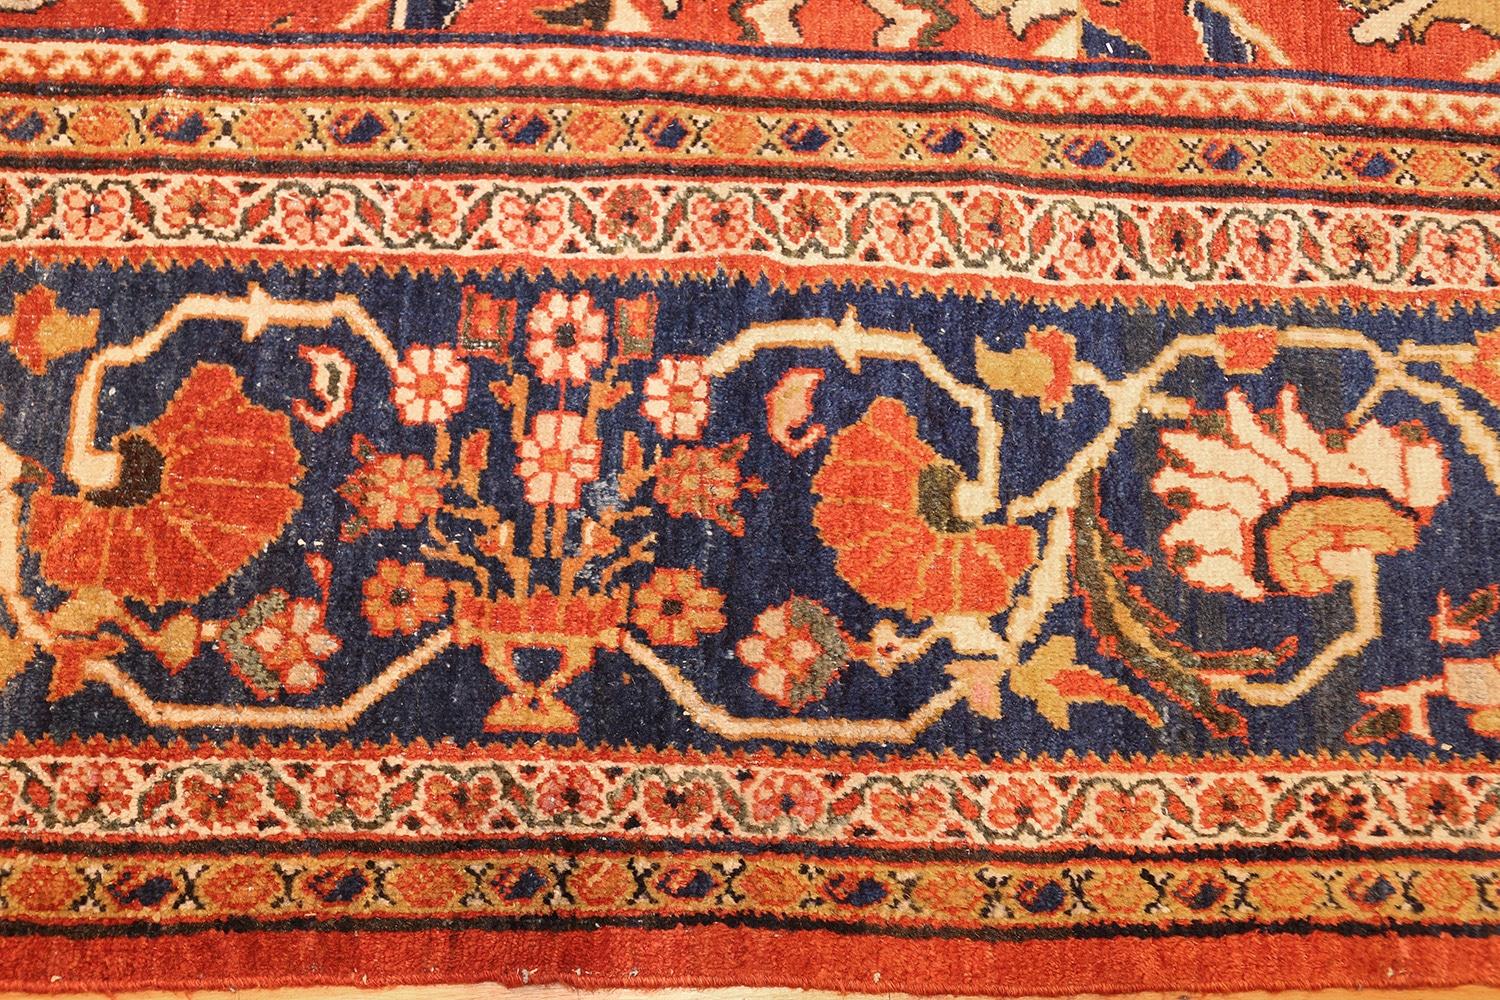 Beautiful Vivid Rust Oversize Antique Persian Sultanabad Carpet, Country of Origin / Rug type: Persia, Circa date: 1900. Size: 15 ft x 24 ft (4.57 m x 7.32 m)

